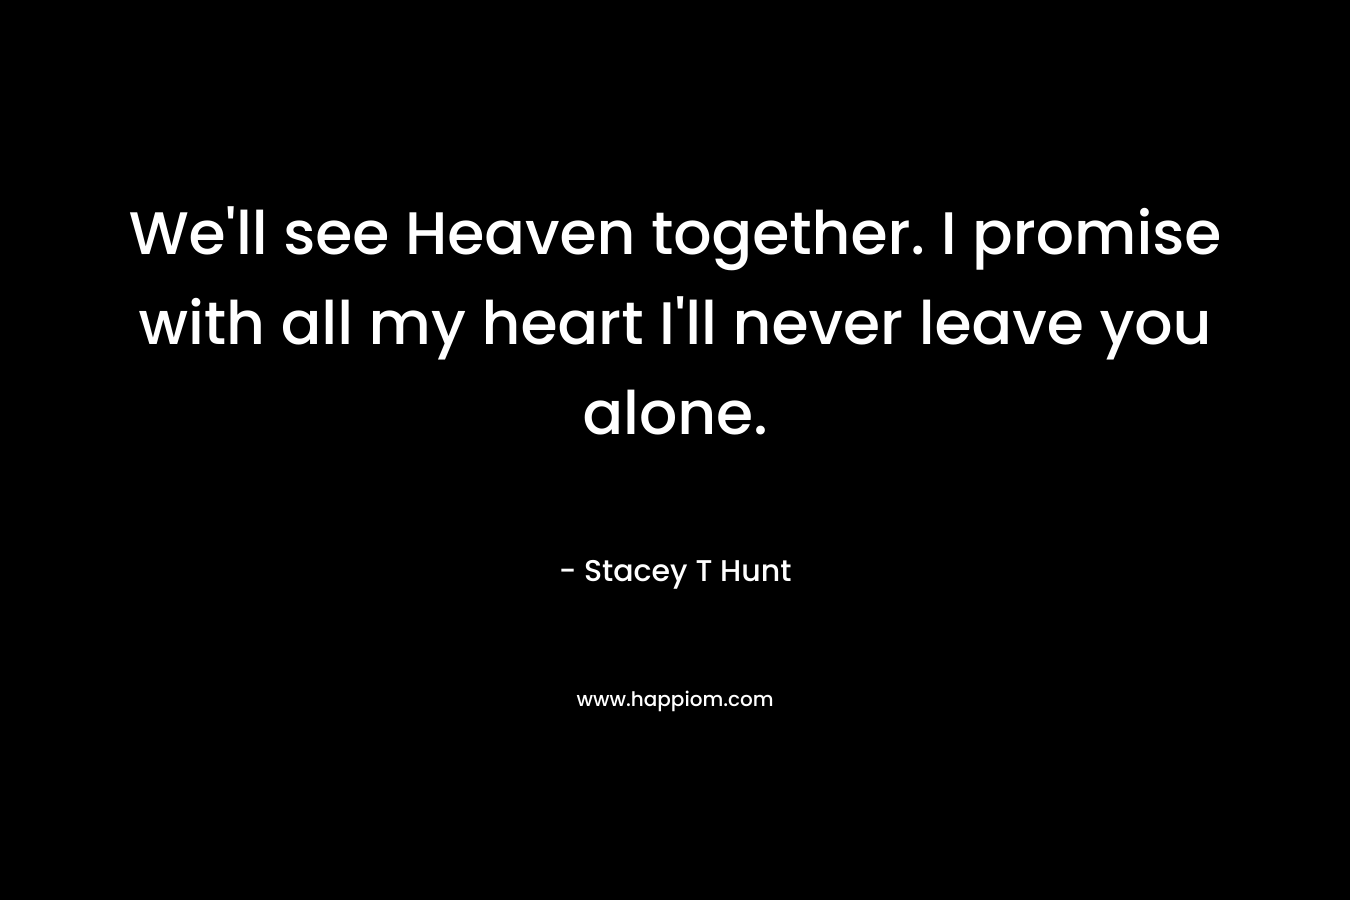 We’ll see Heaven together. I promise with all my heart I’ll never leave you alone. – Stacey T Hunt